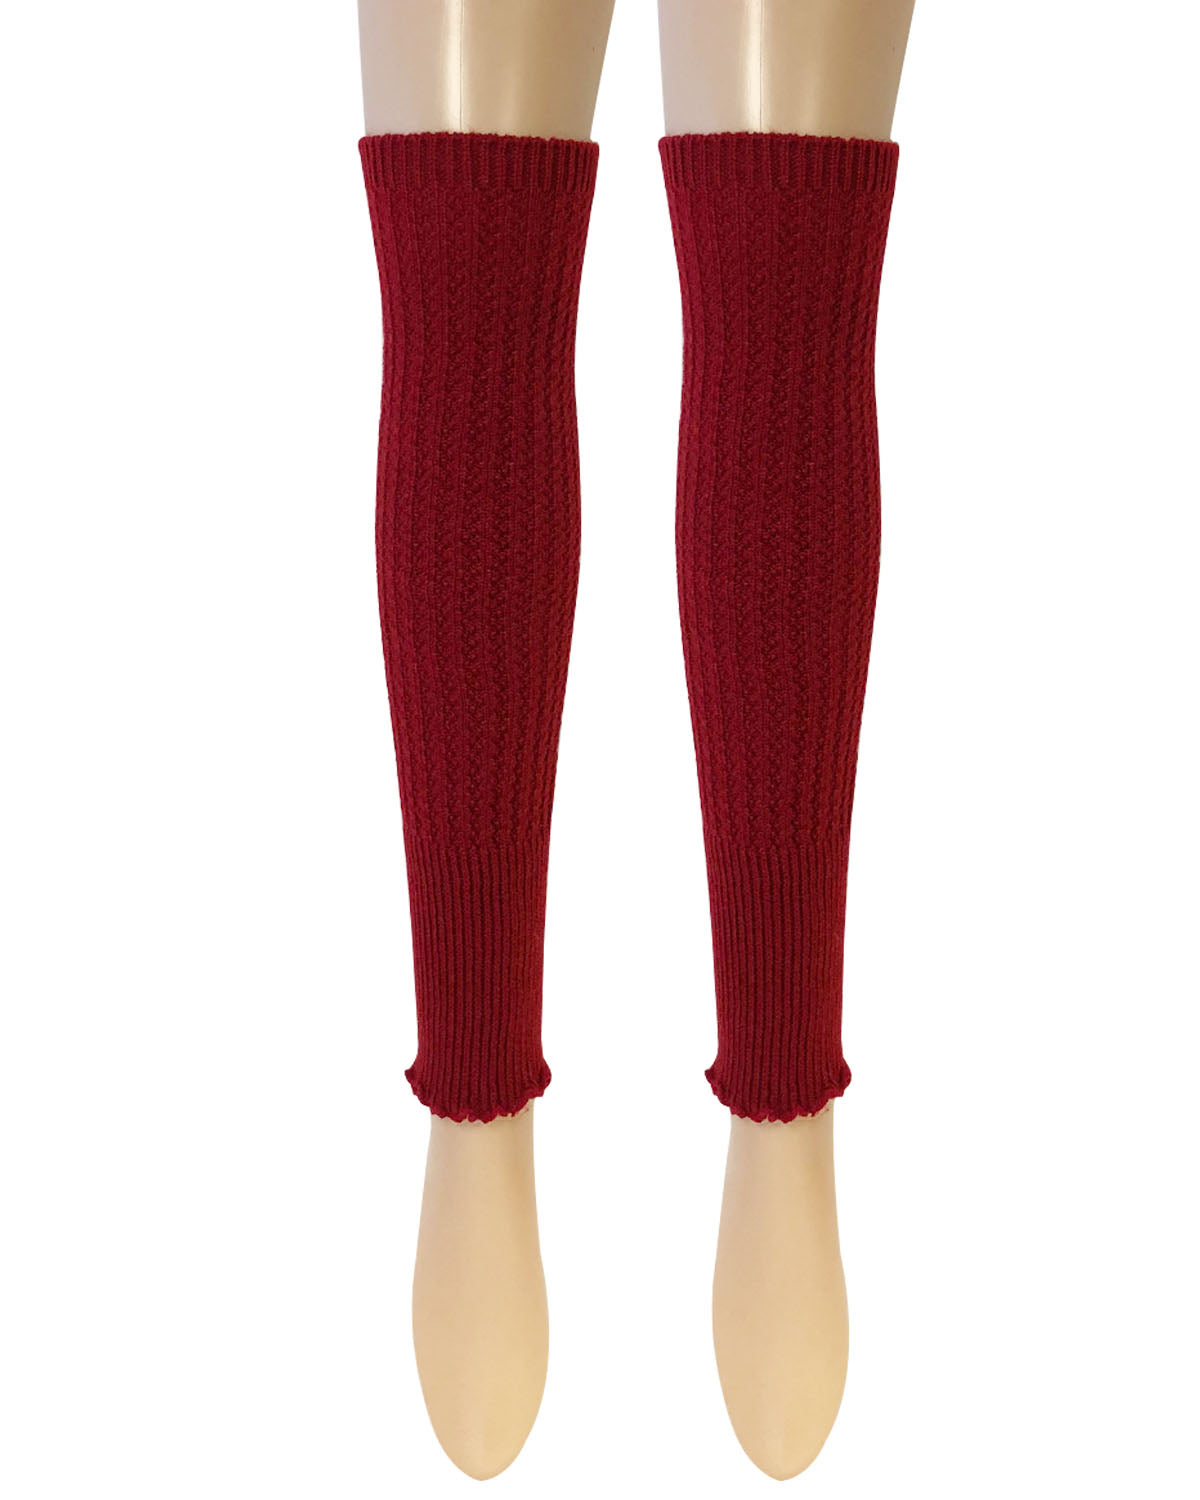 WrapablesÂ® Women's Ribbed Warm Knitted Leg Warmers